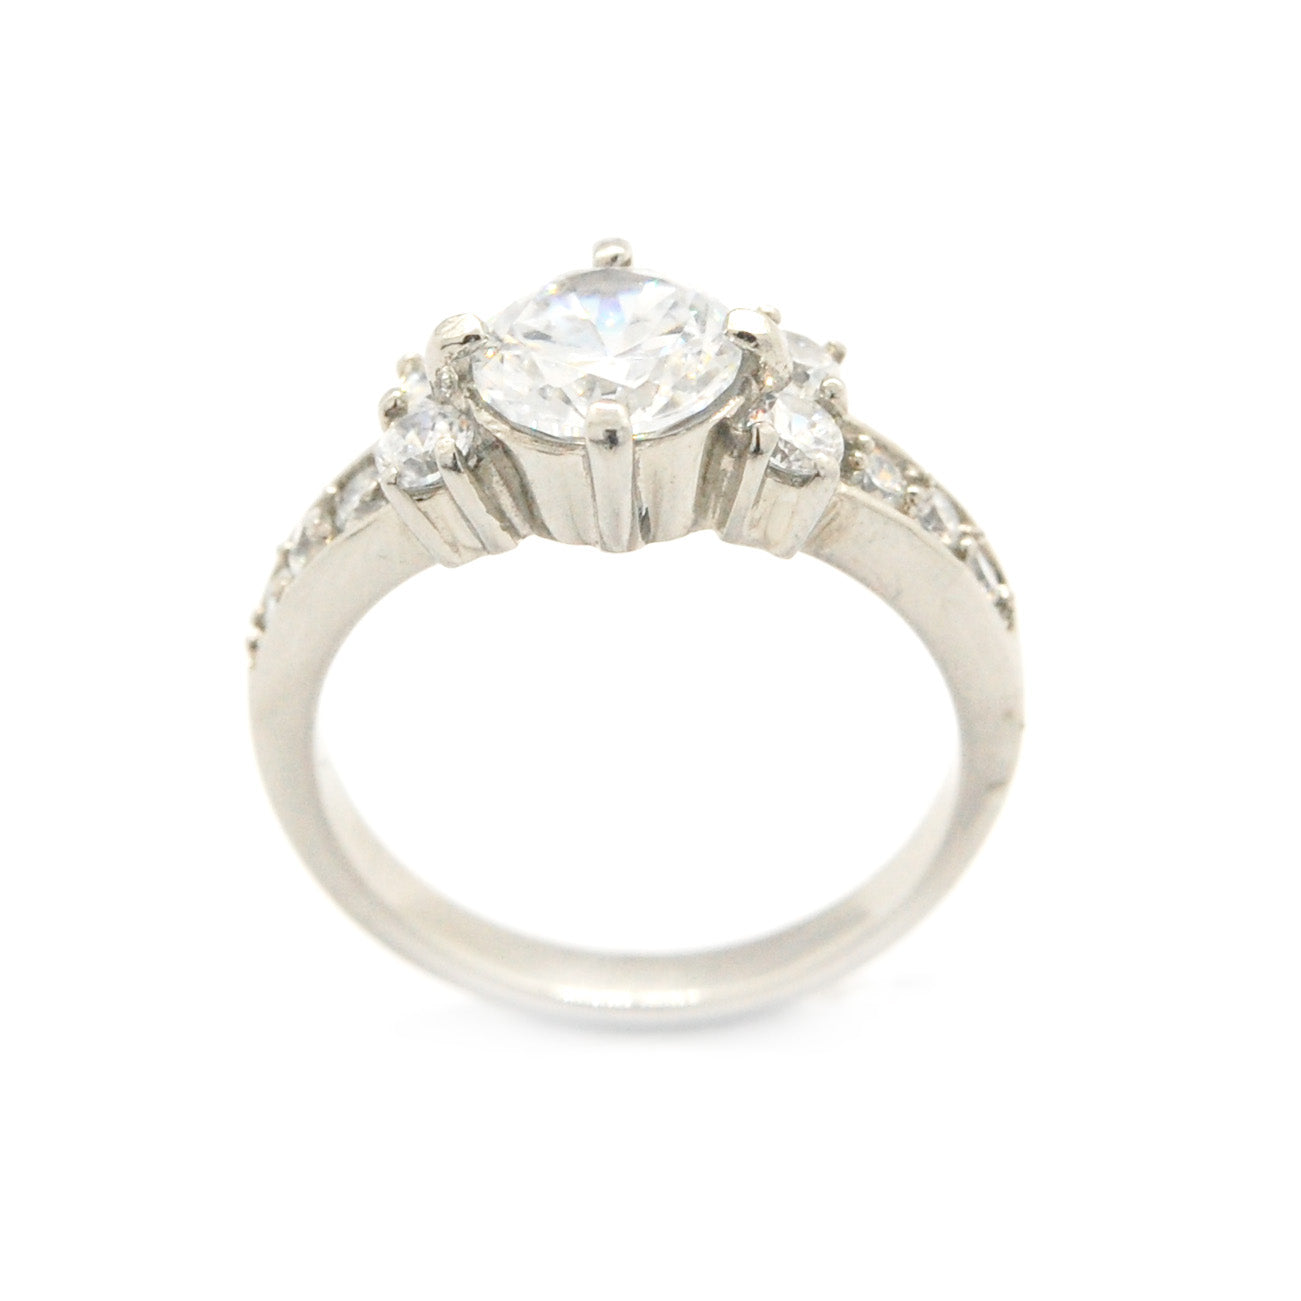 ESR 7560: Christina 7mm Cubic zirconia Center Ring with 4 x 2mm Cubic ziconia Accents & Paved Sides Ring